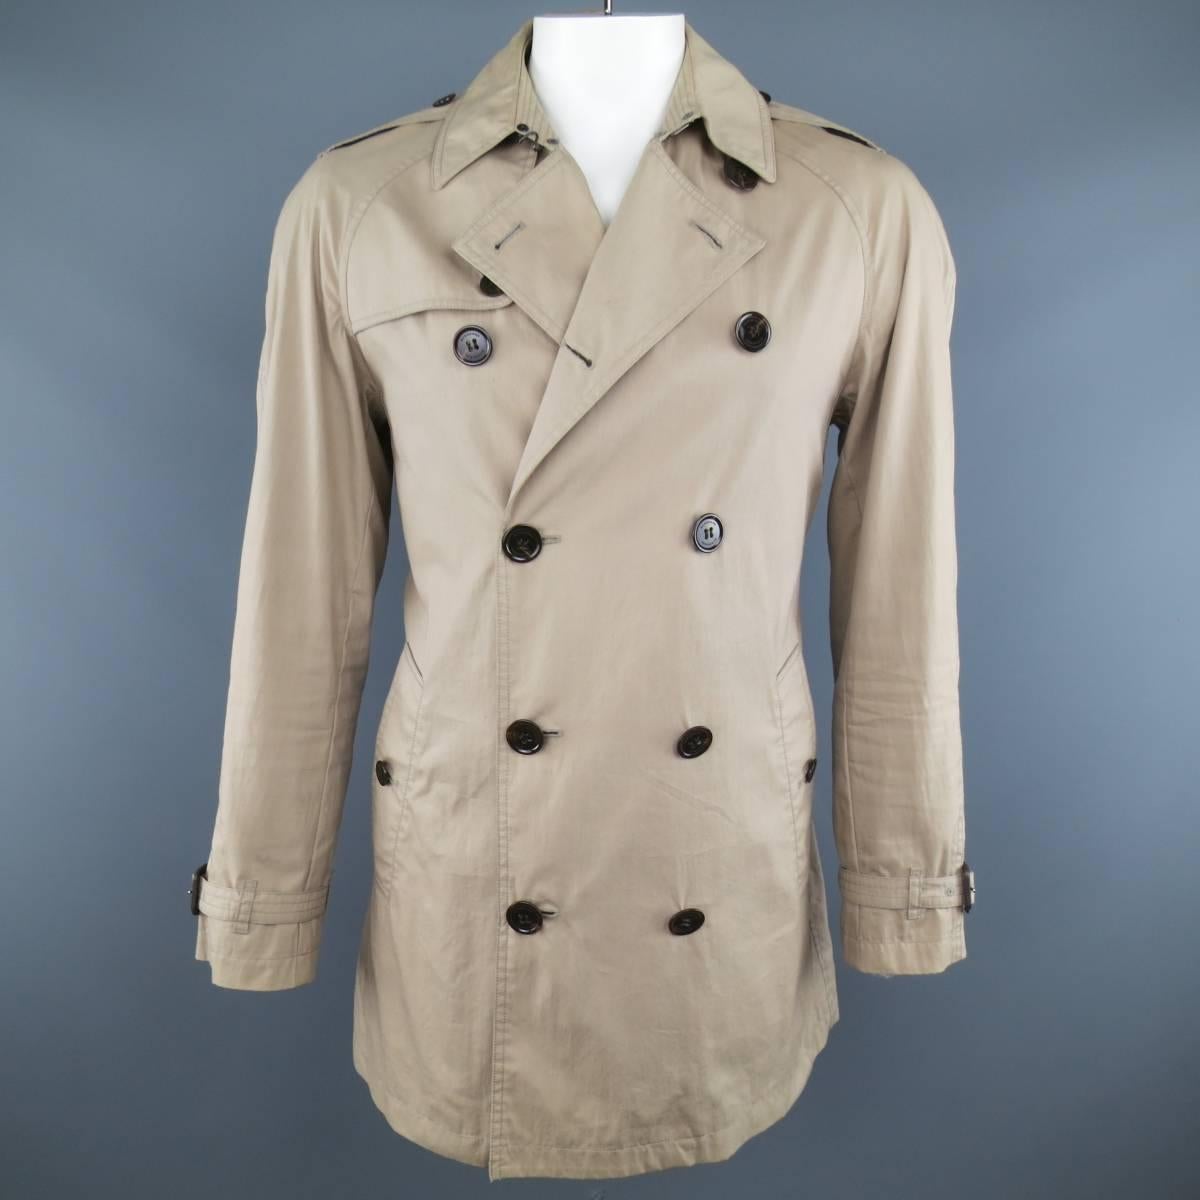 Classic BURBERRY BRIT trench coat comes in khaki cotton nylon blend canvas and features a pointed collar lapel, storm flap, double breasted button closure, belted waist, and raglan sleeves with epaulets. Wear throughout and discolorations shown in